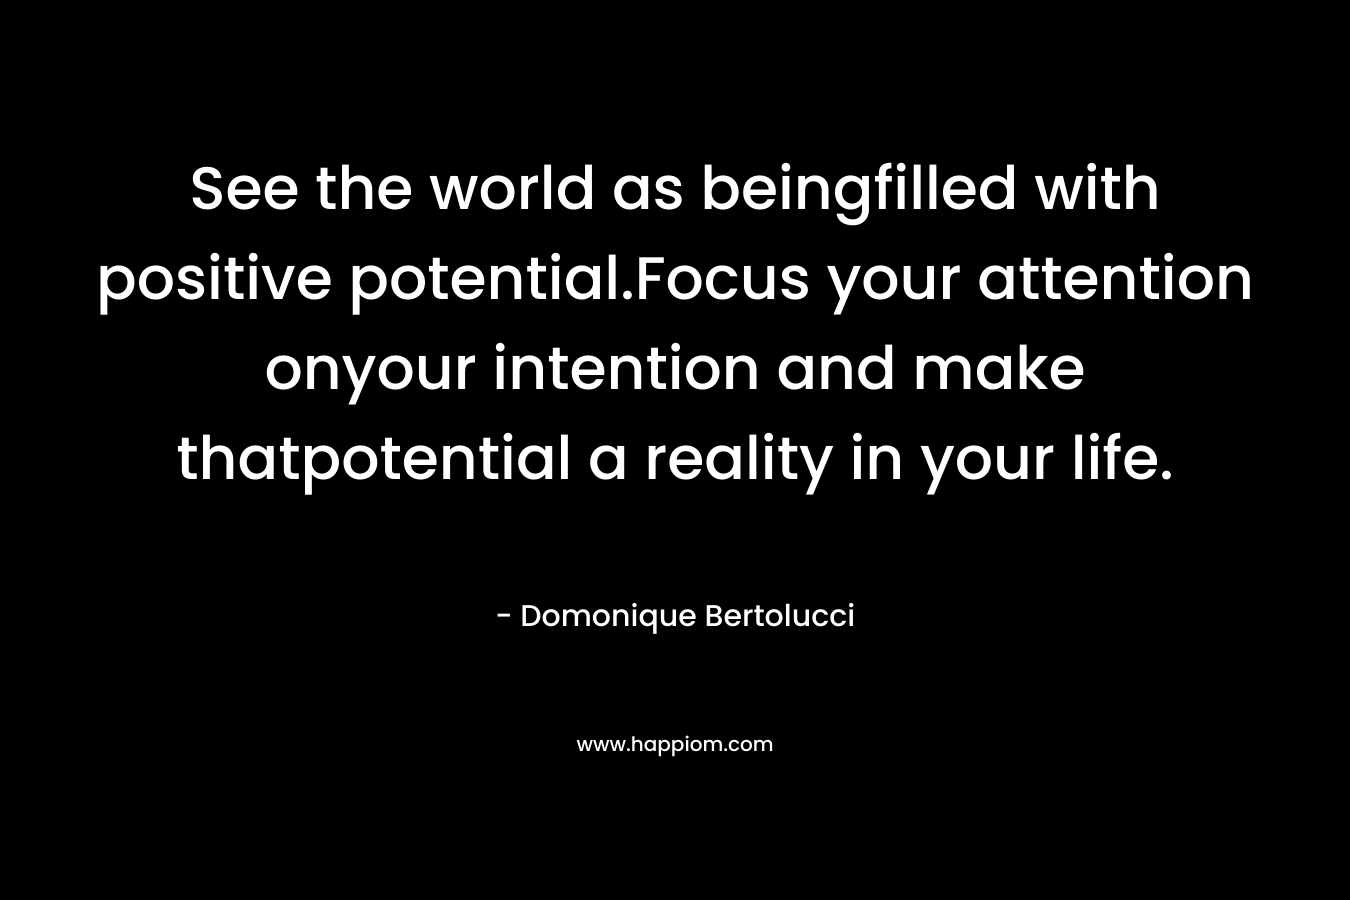 See the world as beingfilled with positive potential.Focus your attention onyour intention and make thatpotential a reality in your life. – Domonique Bertolucci